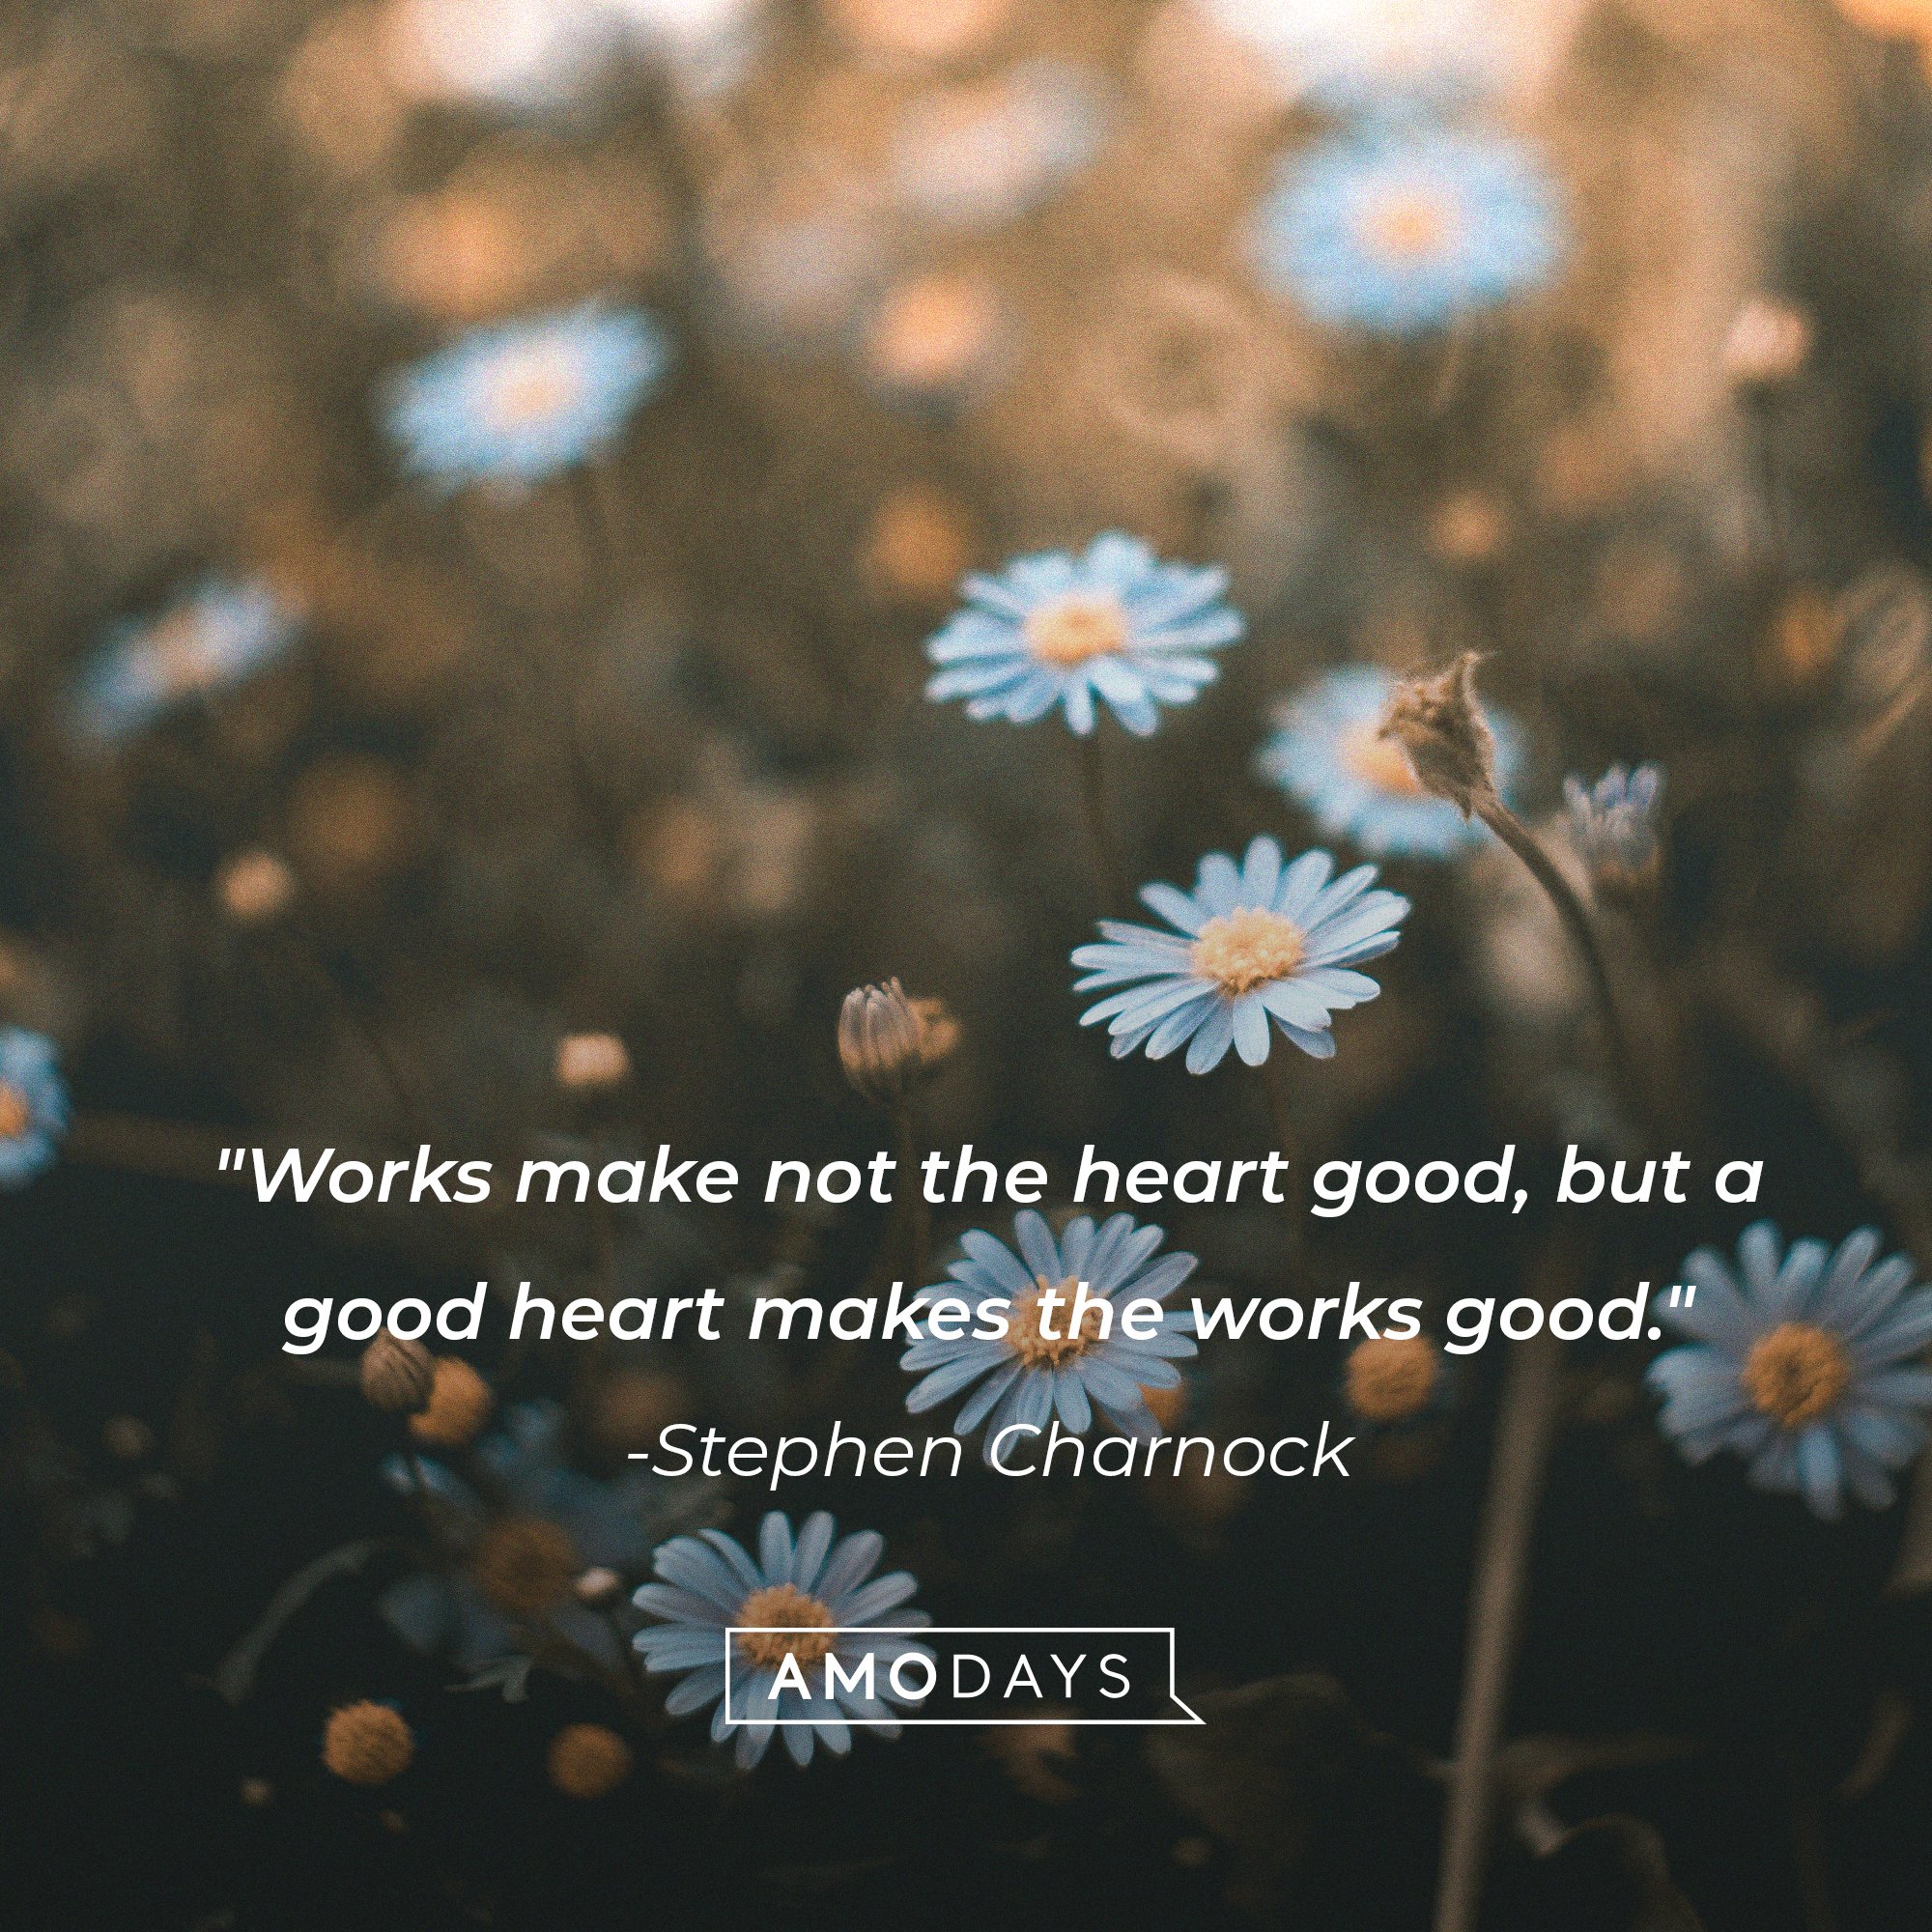 Stephen Charnock’s quote: "Works make not the heart good, but a good heart makes the works good." | Image: AmoDays